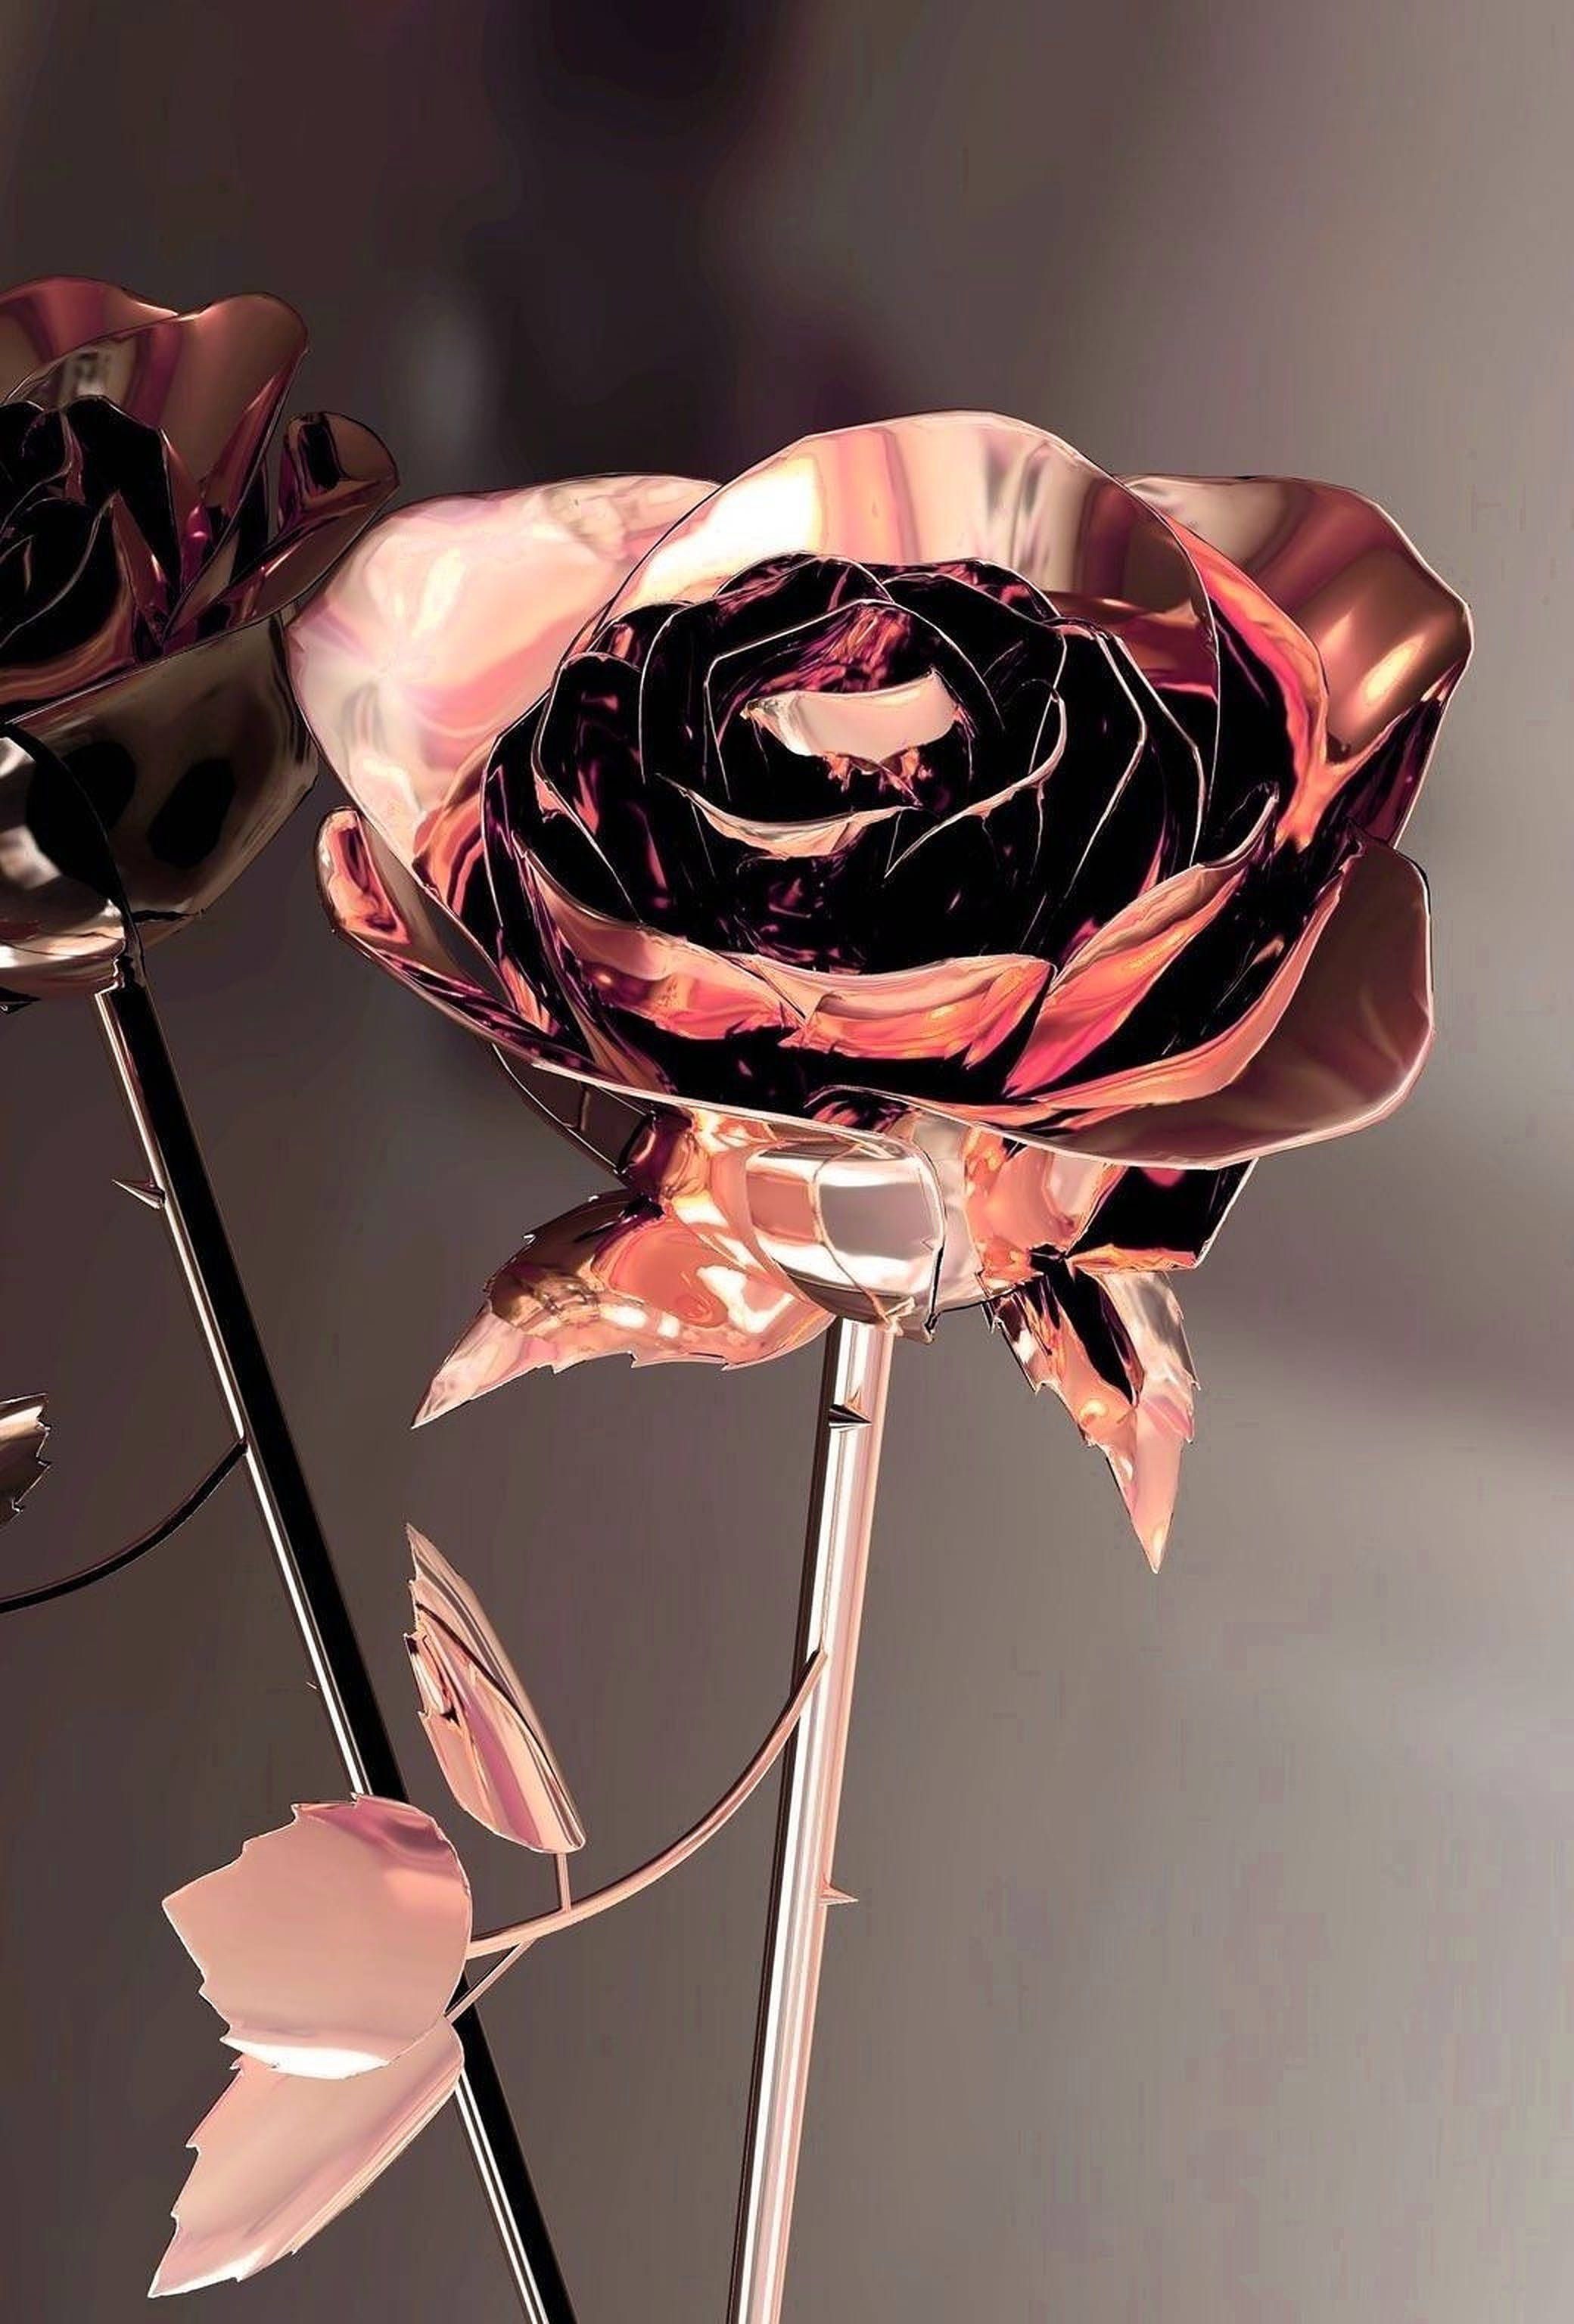 A close up of two roses on stems - Rose gold, gold, roses